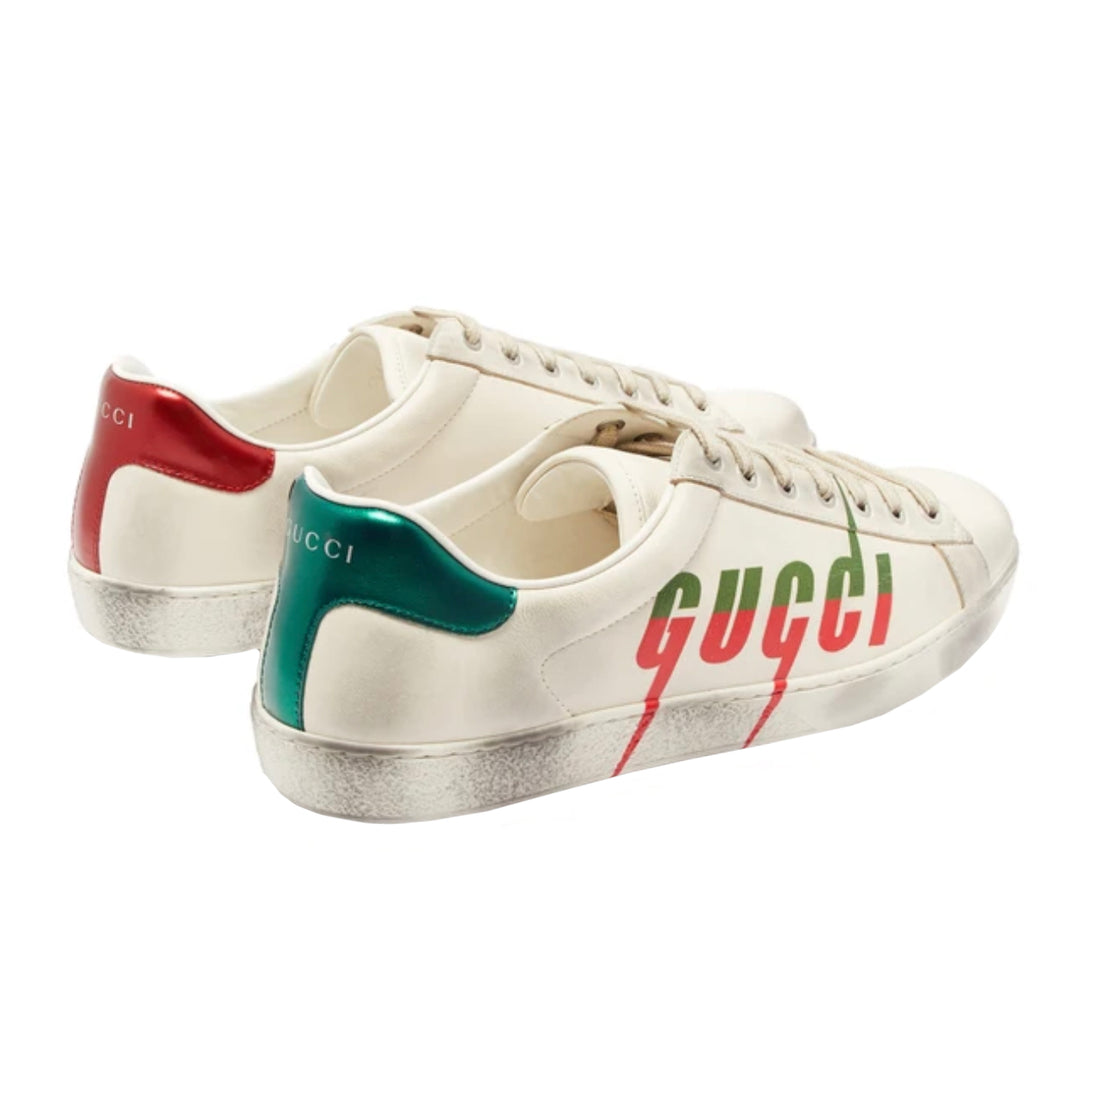 Gucci Ace Blade Sneaker